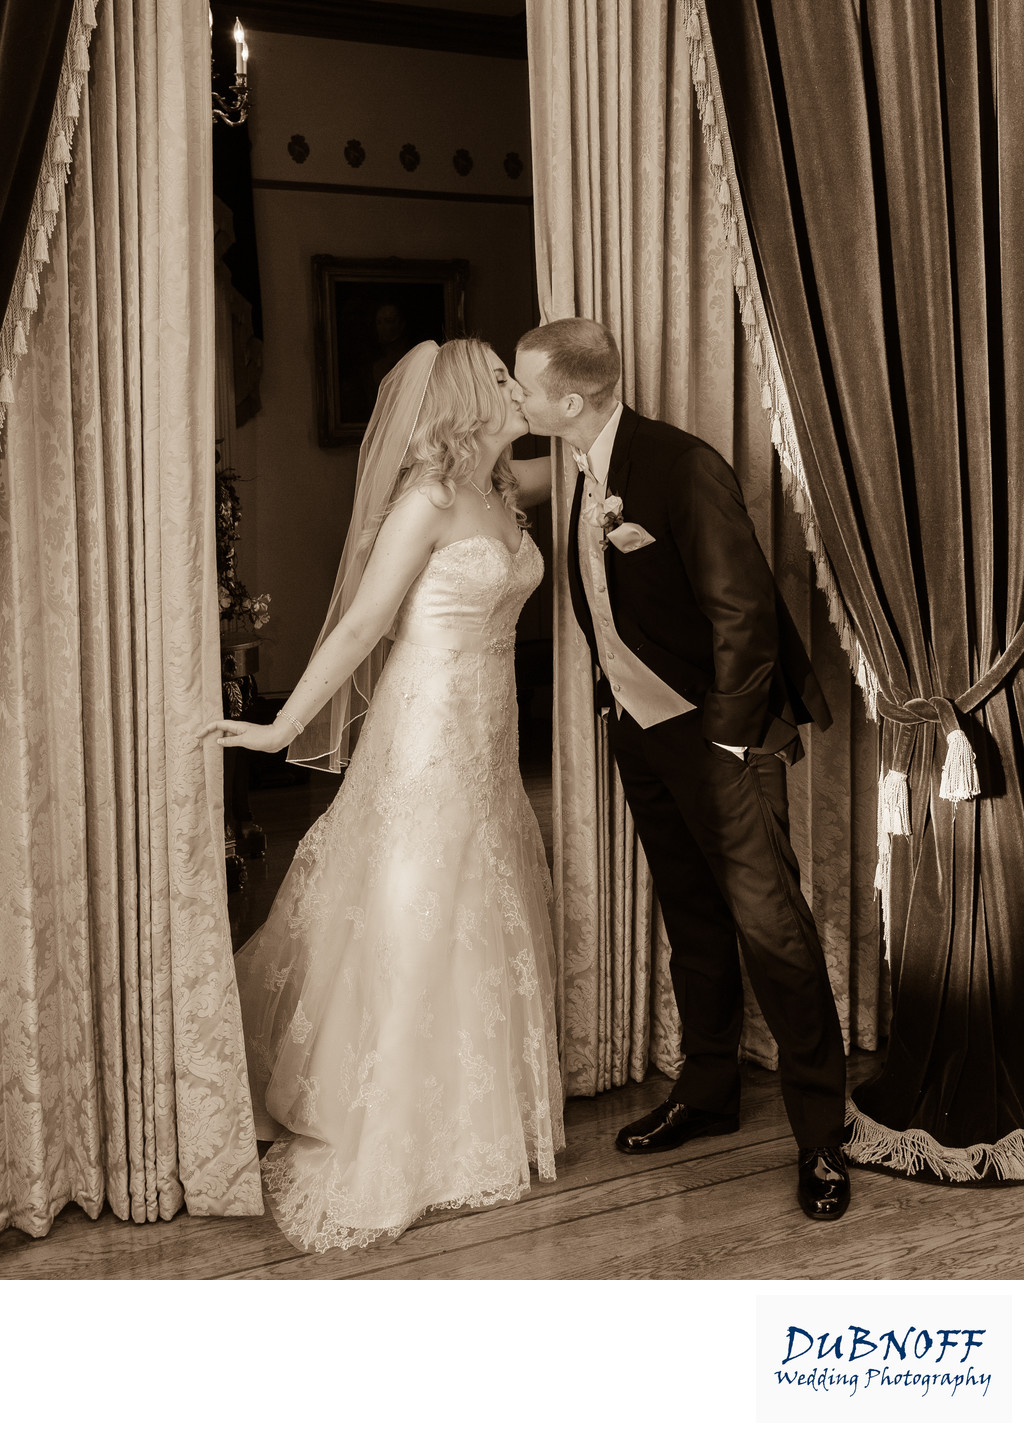 first look wedding kiss in Sepia Tone Photography